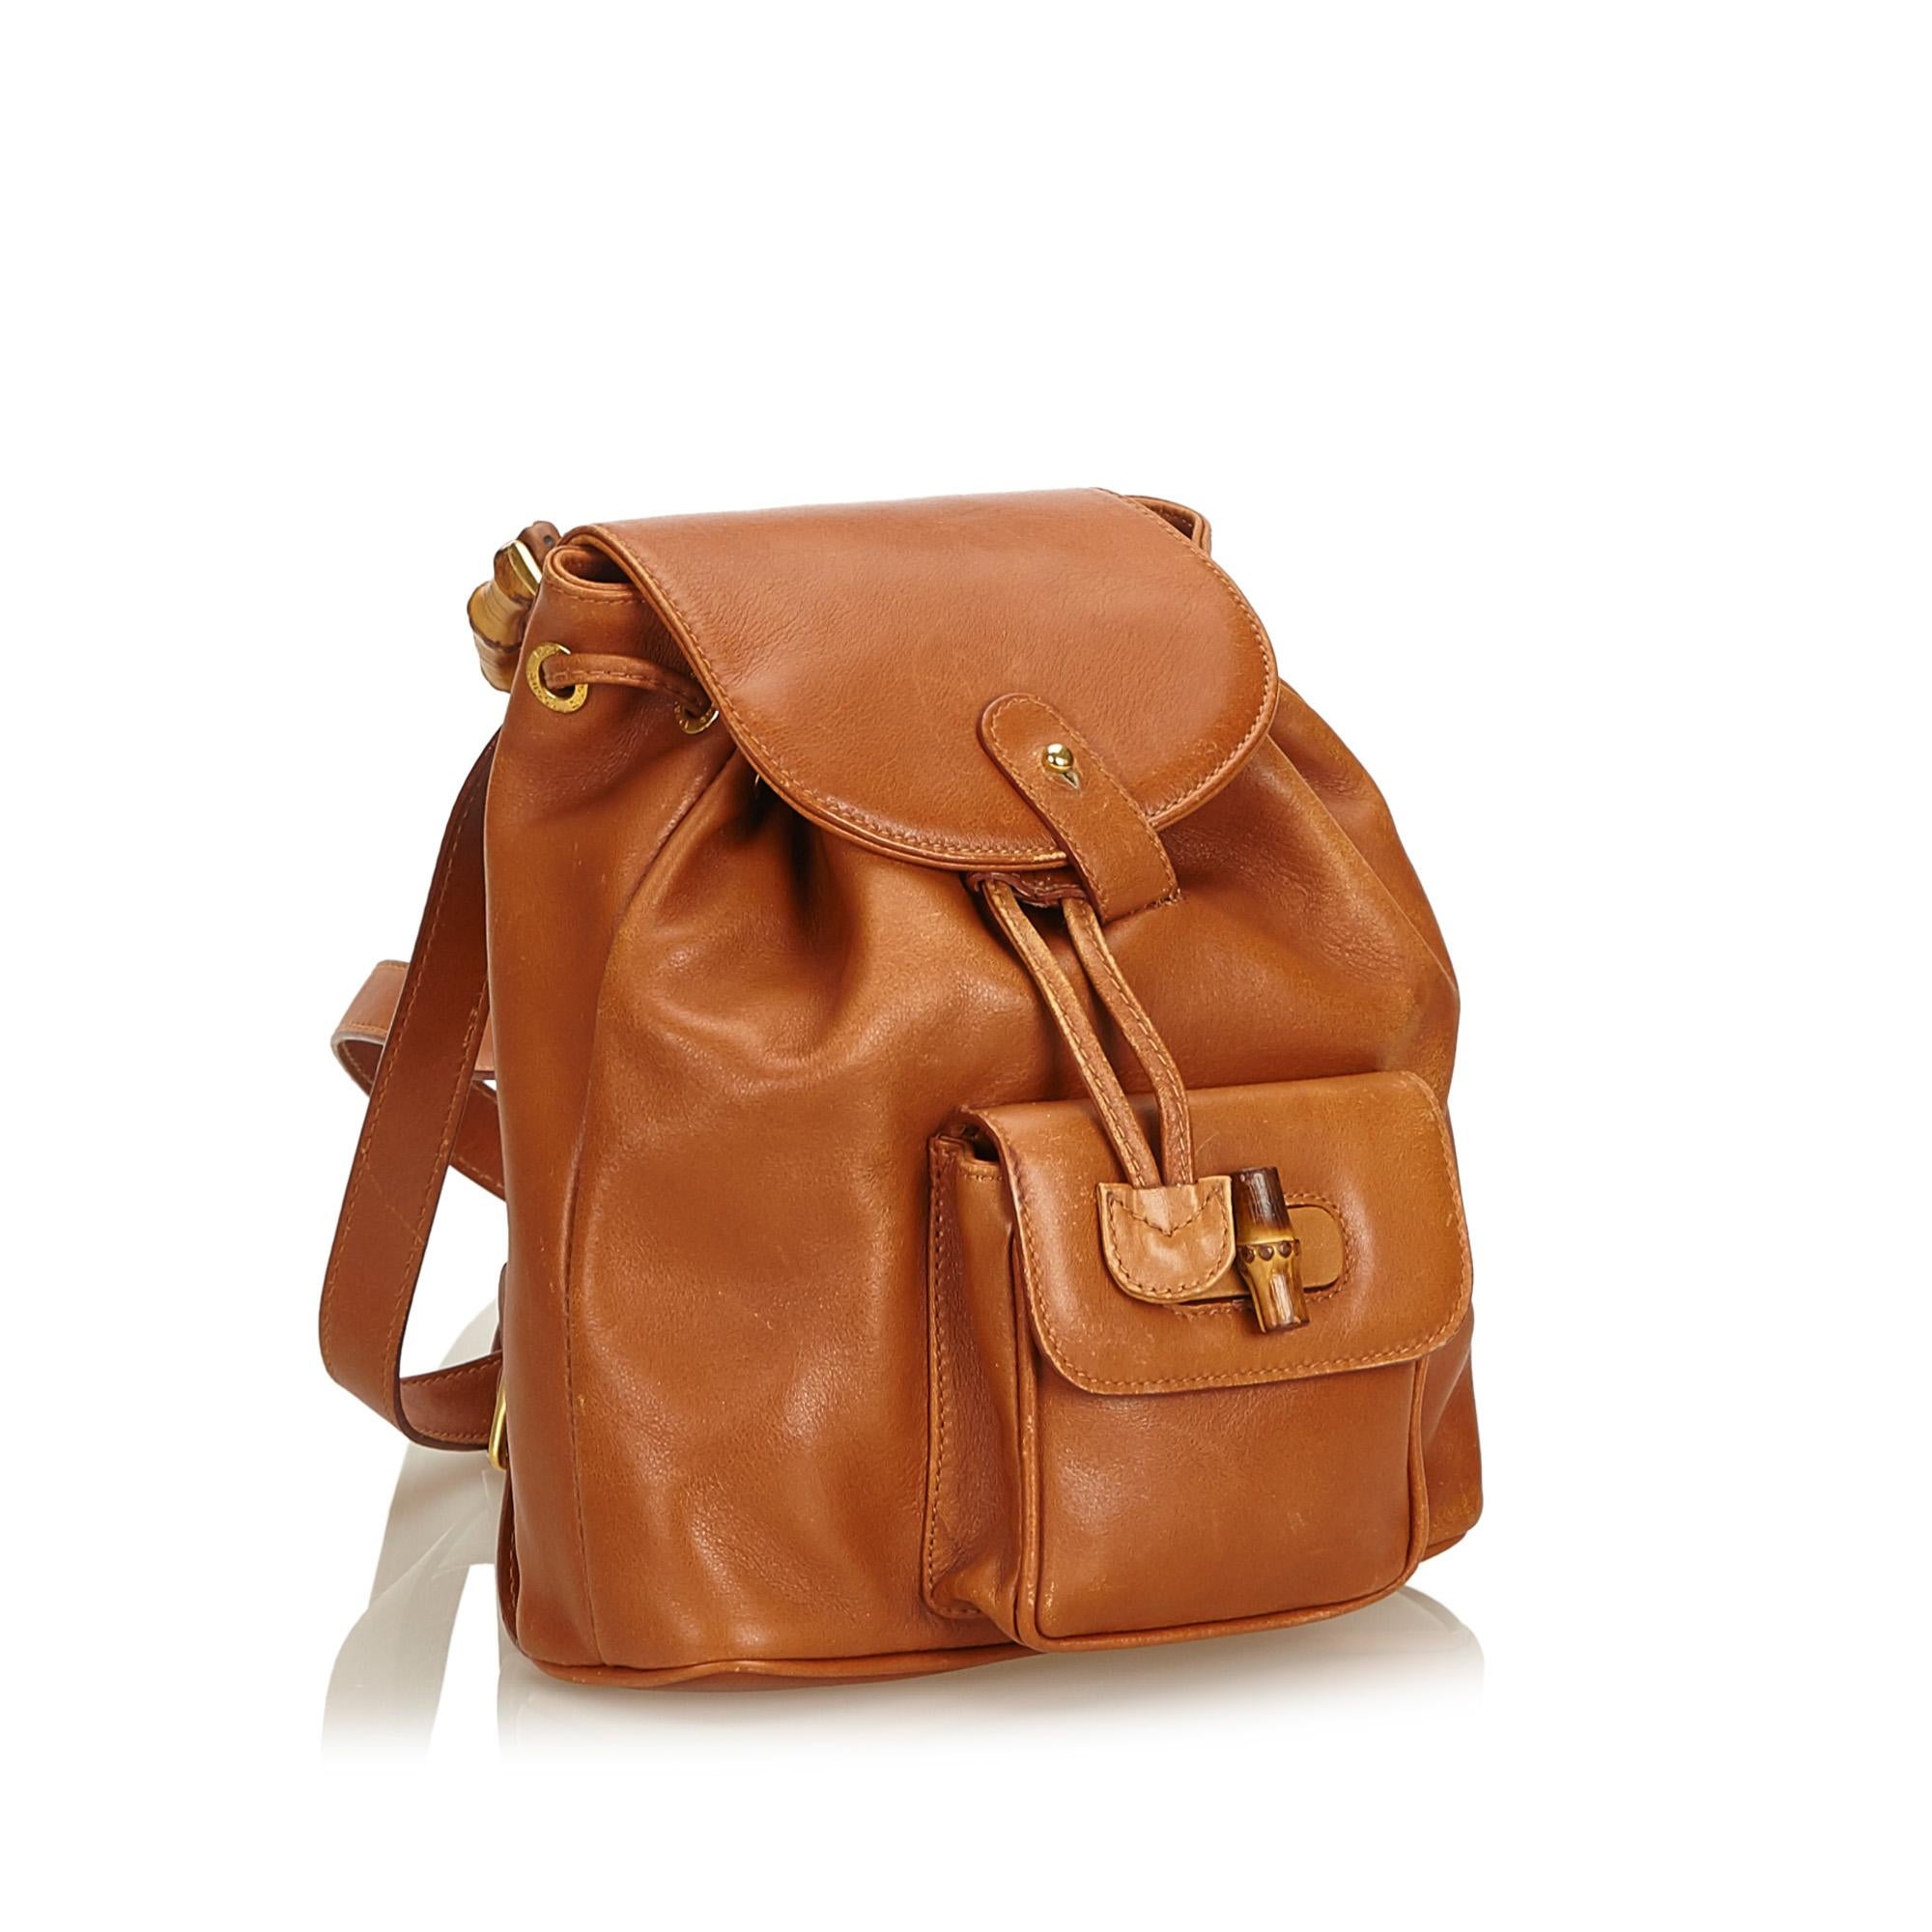 This backpack features a leather body, flat back straps, bamboo top handle, top flap, drawstring closure, exterior flap pocket with bamboo twist lock closure, and interior zip pocket. It carries as B condition rating.

Inclusions: 
This item does